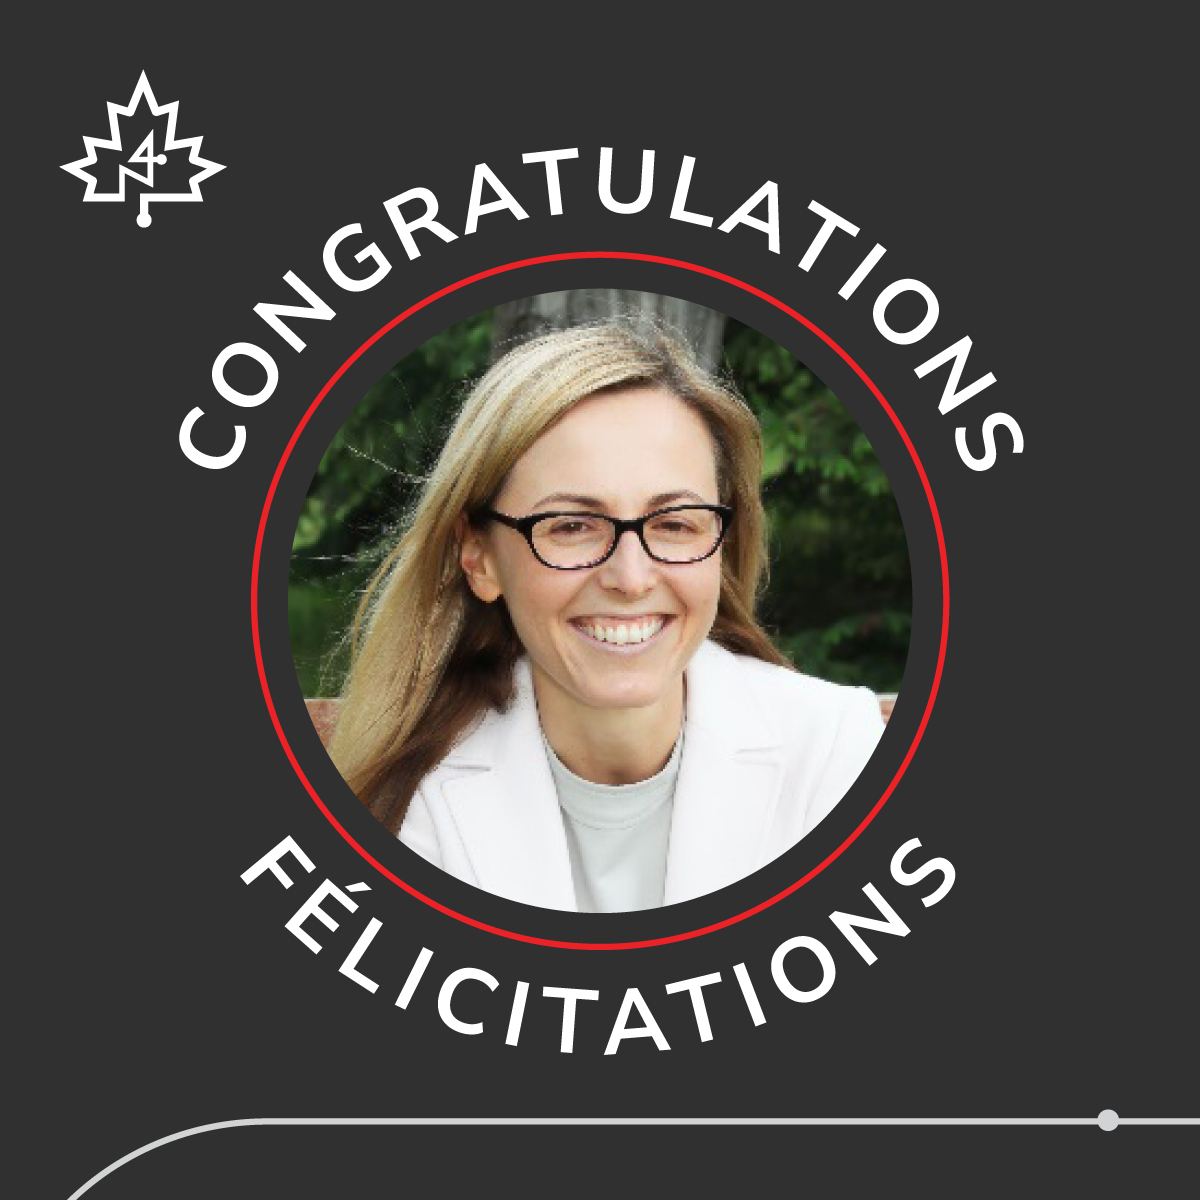 Photo of Dr. Annalee Coakley in frame that says "Congratulations" in French and English